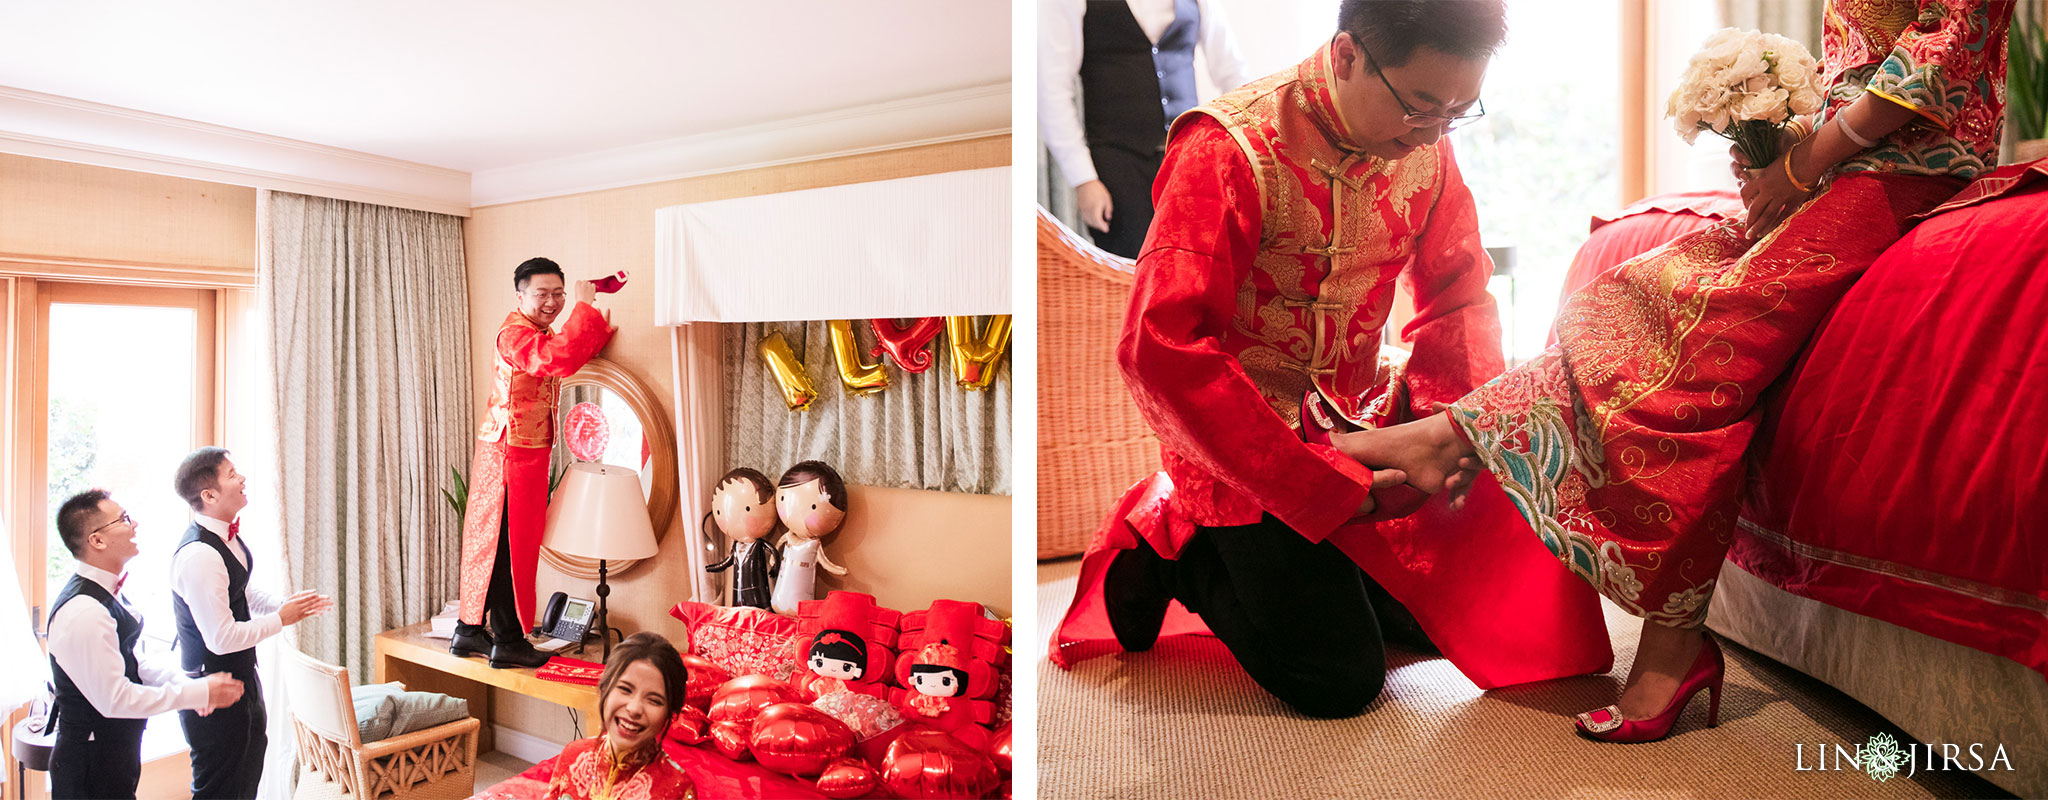 09 pelican hill orange county chinese wedding photography